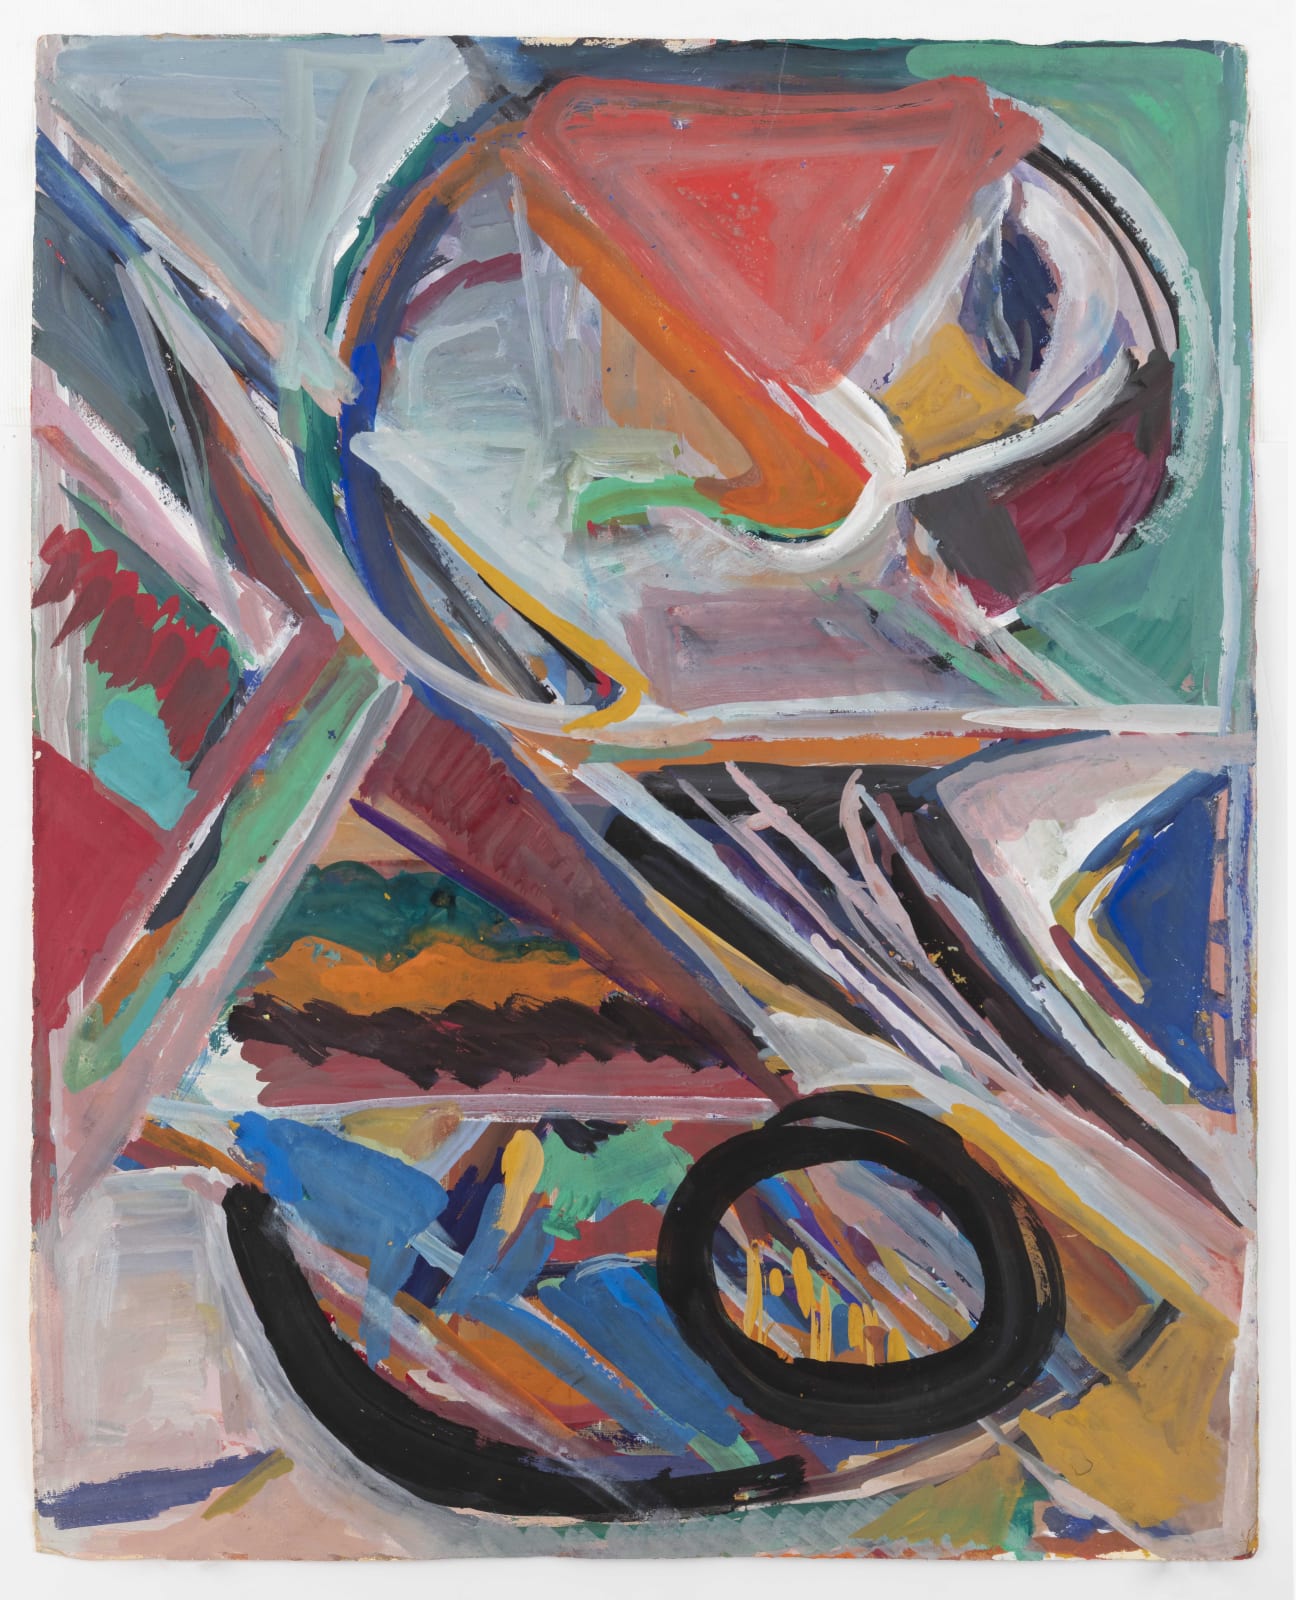 Shirley Jaffe Untitled, 1964-1970 ca. Mixed media on paper 74 x 62 x 3,5 cm (29 1/8 x 24 13/32 x 1 3/8 in) framed